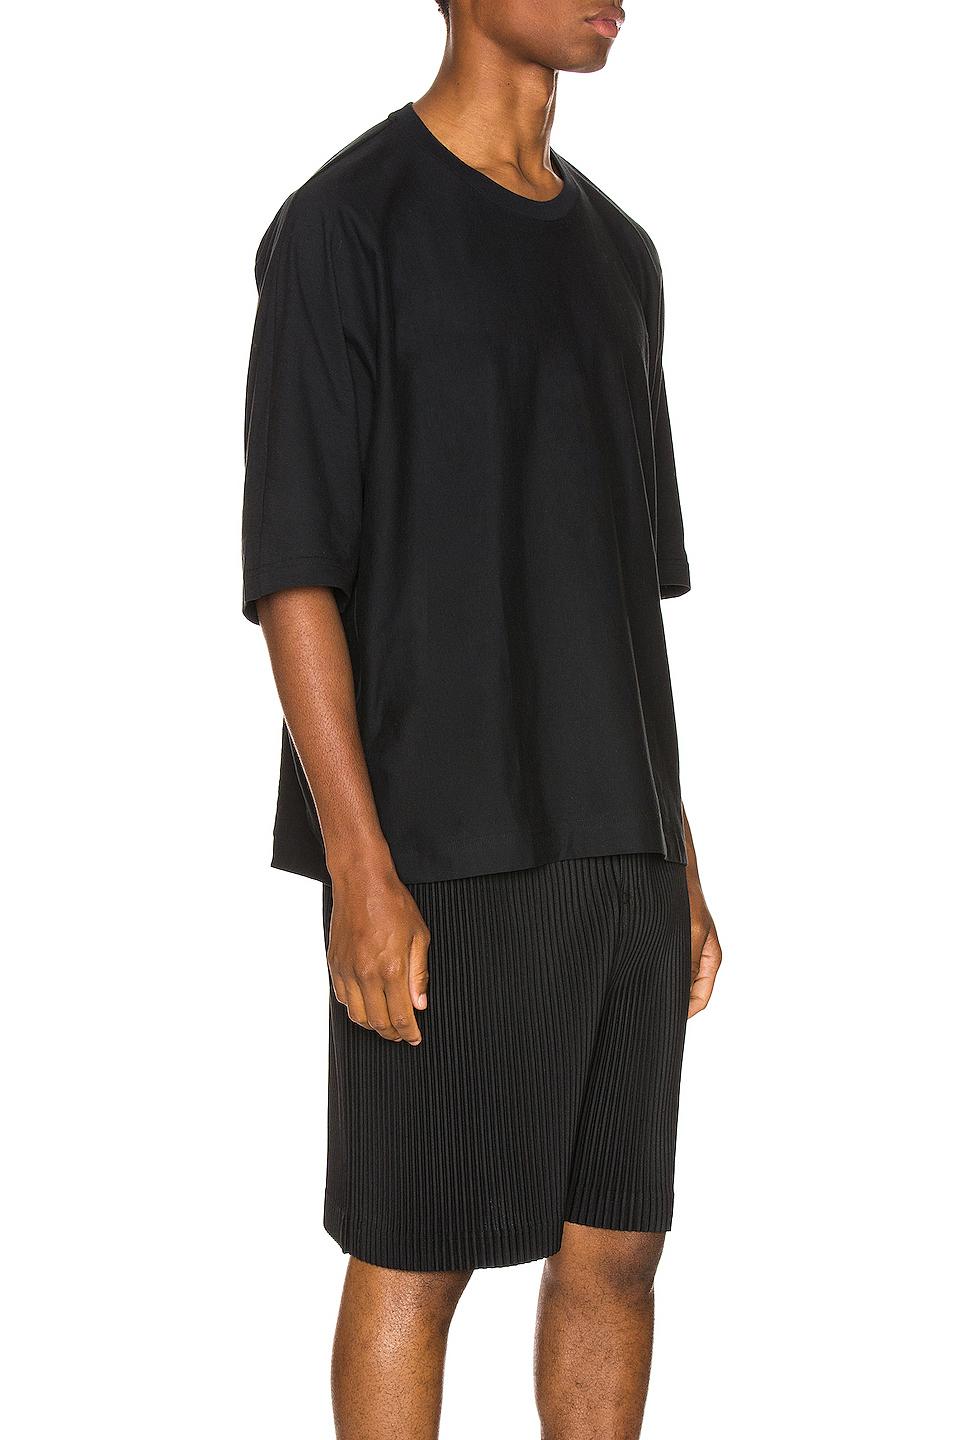 Homme Plissé Issey Miyake Cotton Release Tee in Black for Men - Lyst